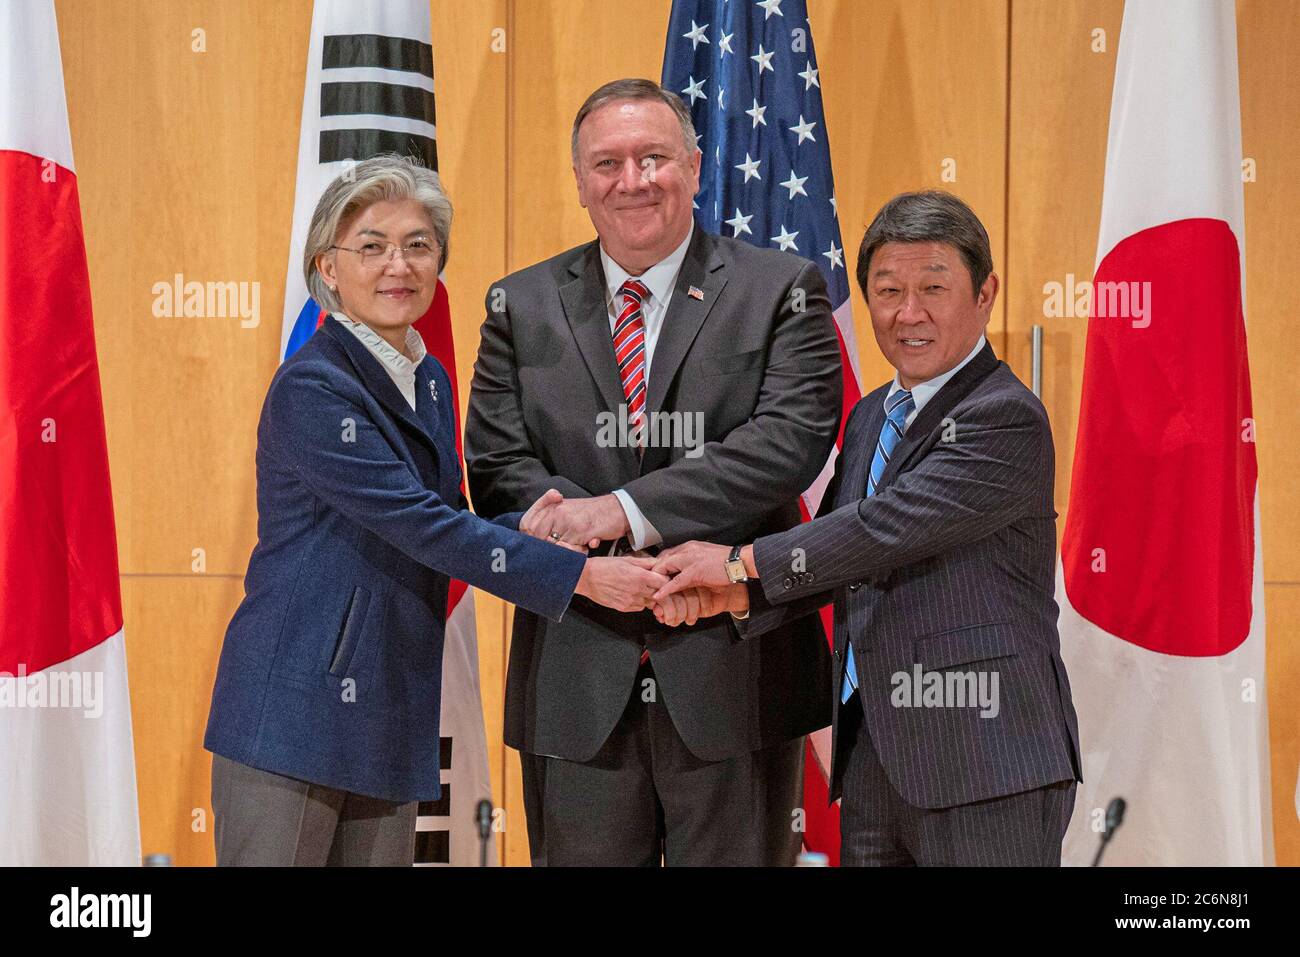 U.S. Secretary of State Pompeo meets with Japanese Foreign Minister Toshimitsu Motegi and Republic of Korea Foreign Minister Kyung-wha Kang in Munich on February 15, 2020 Stock Photo